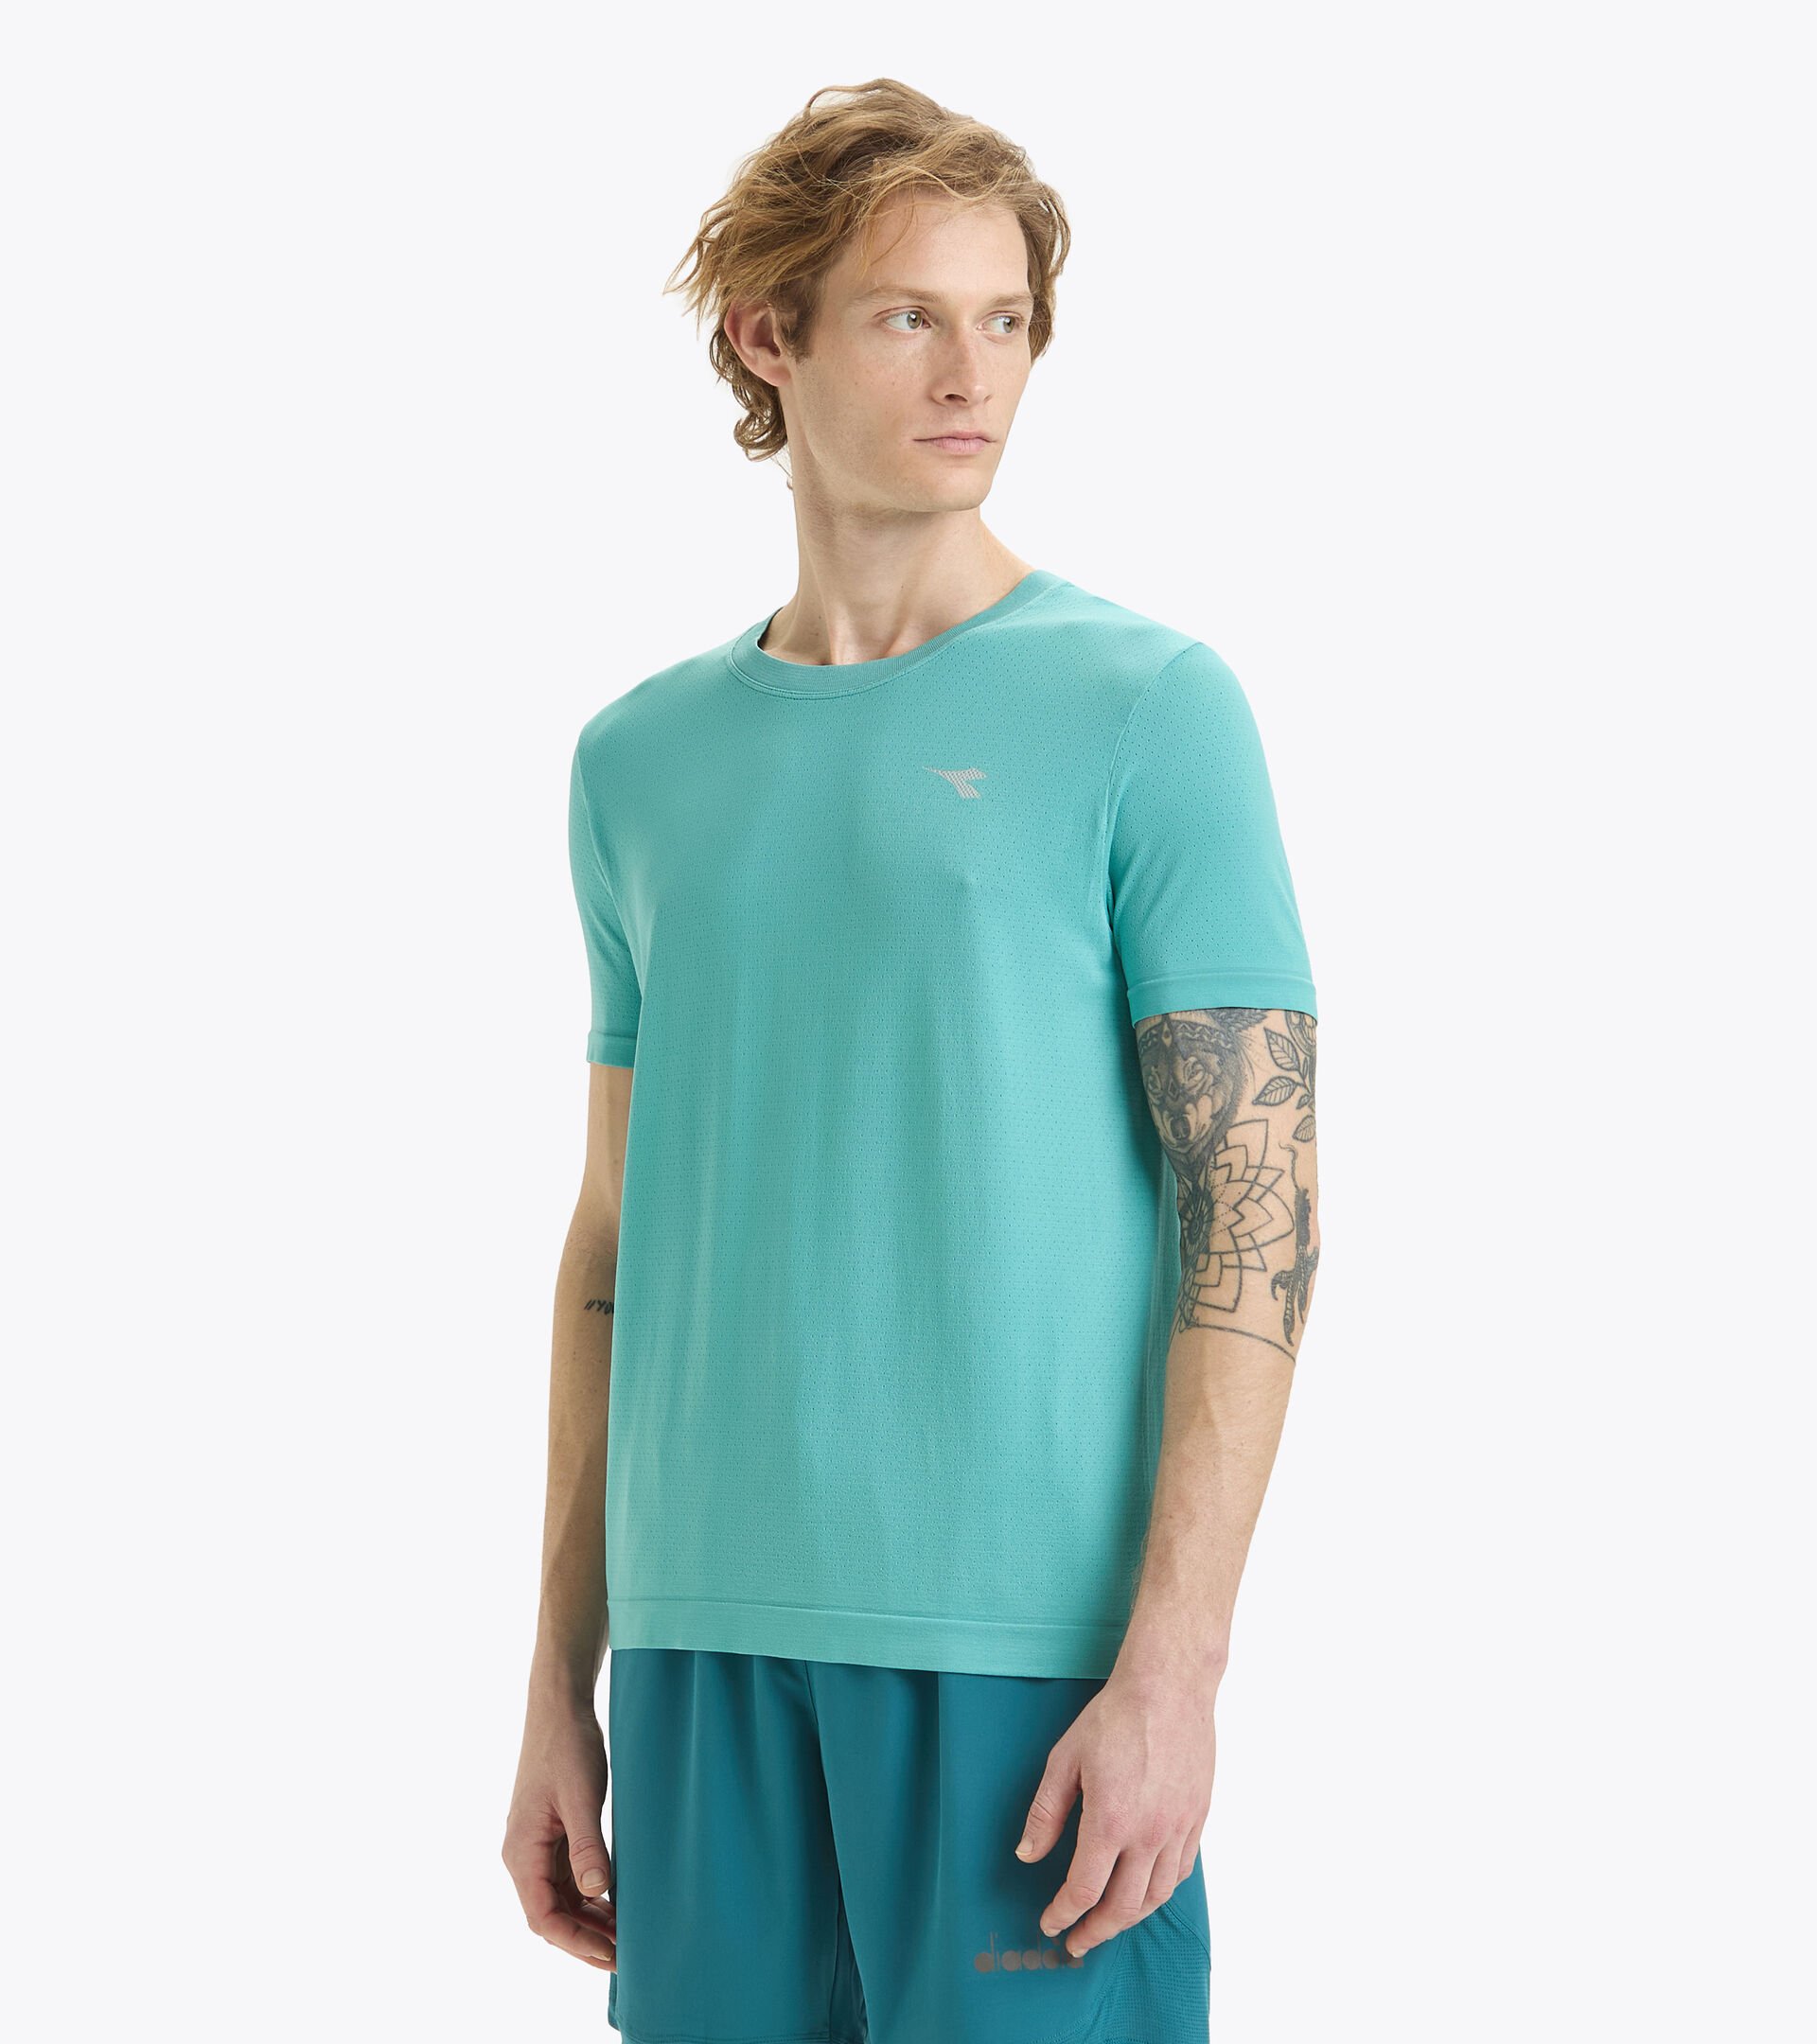 Lauf-T-Shirt ohne Nähte - made in Italy - Herren SS T-SHIRT SKIN FRIENDLY DUSTY TURQUOISE - Diadora